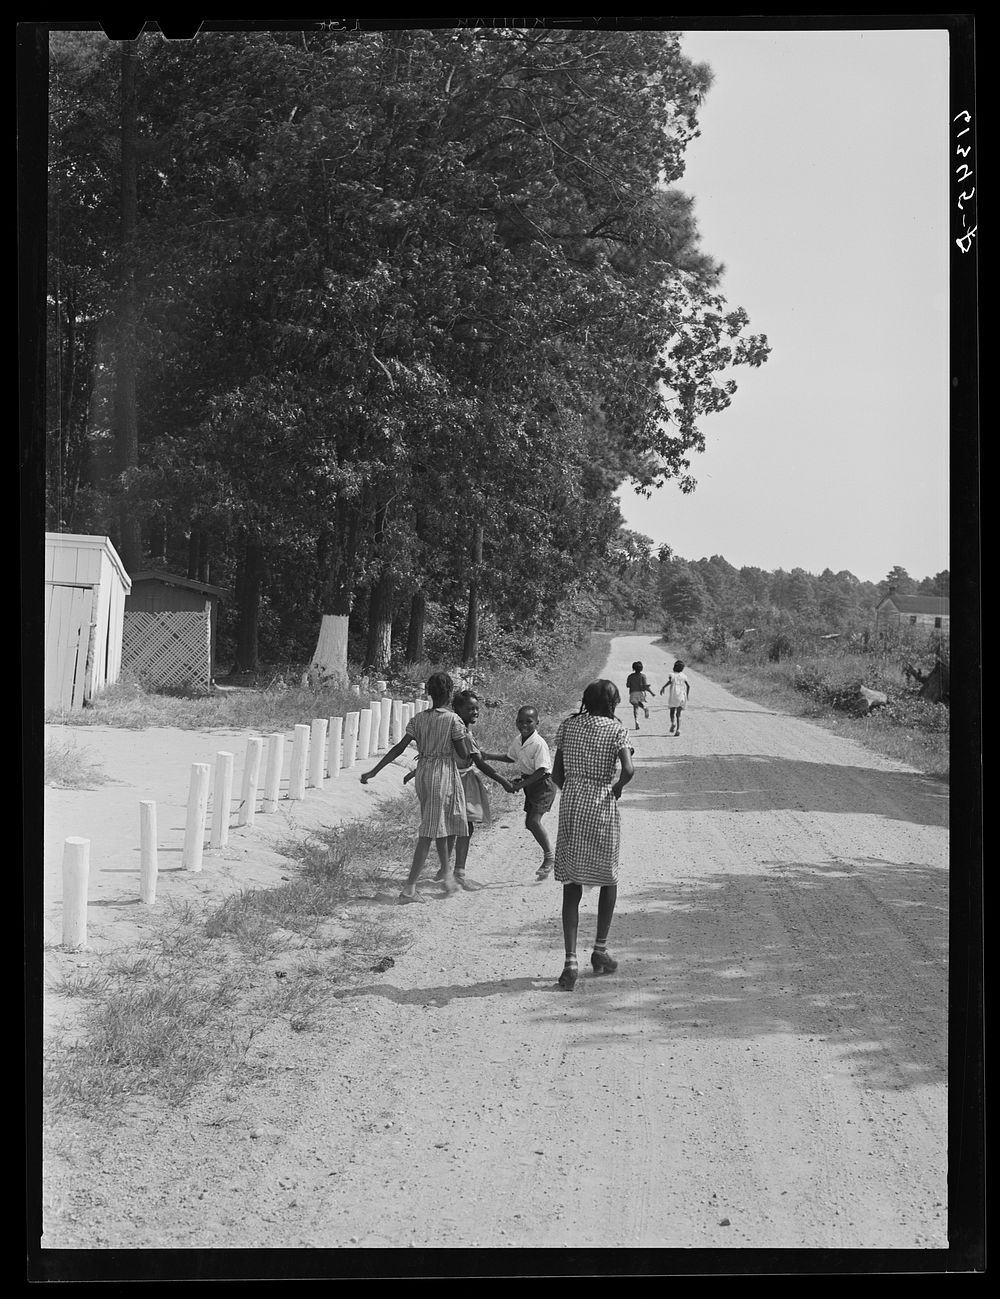 Children going home from school at noon. Saint Mary's County, near Scotland, Maryland. Sourced from the Library of Congress.